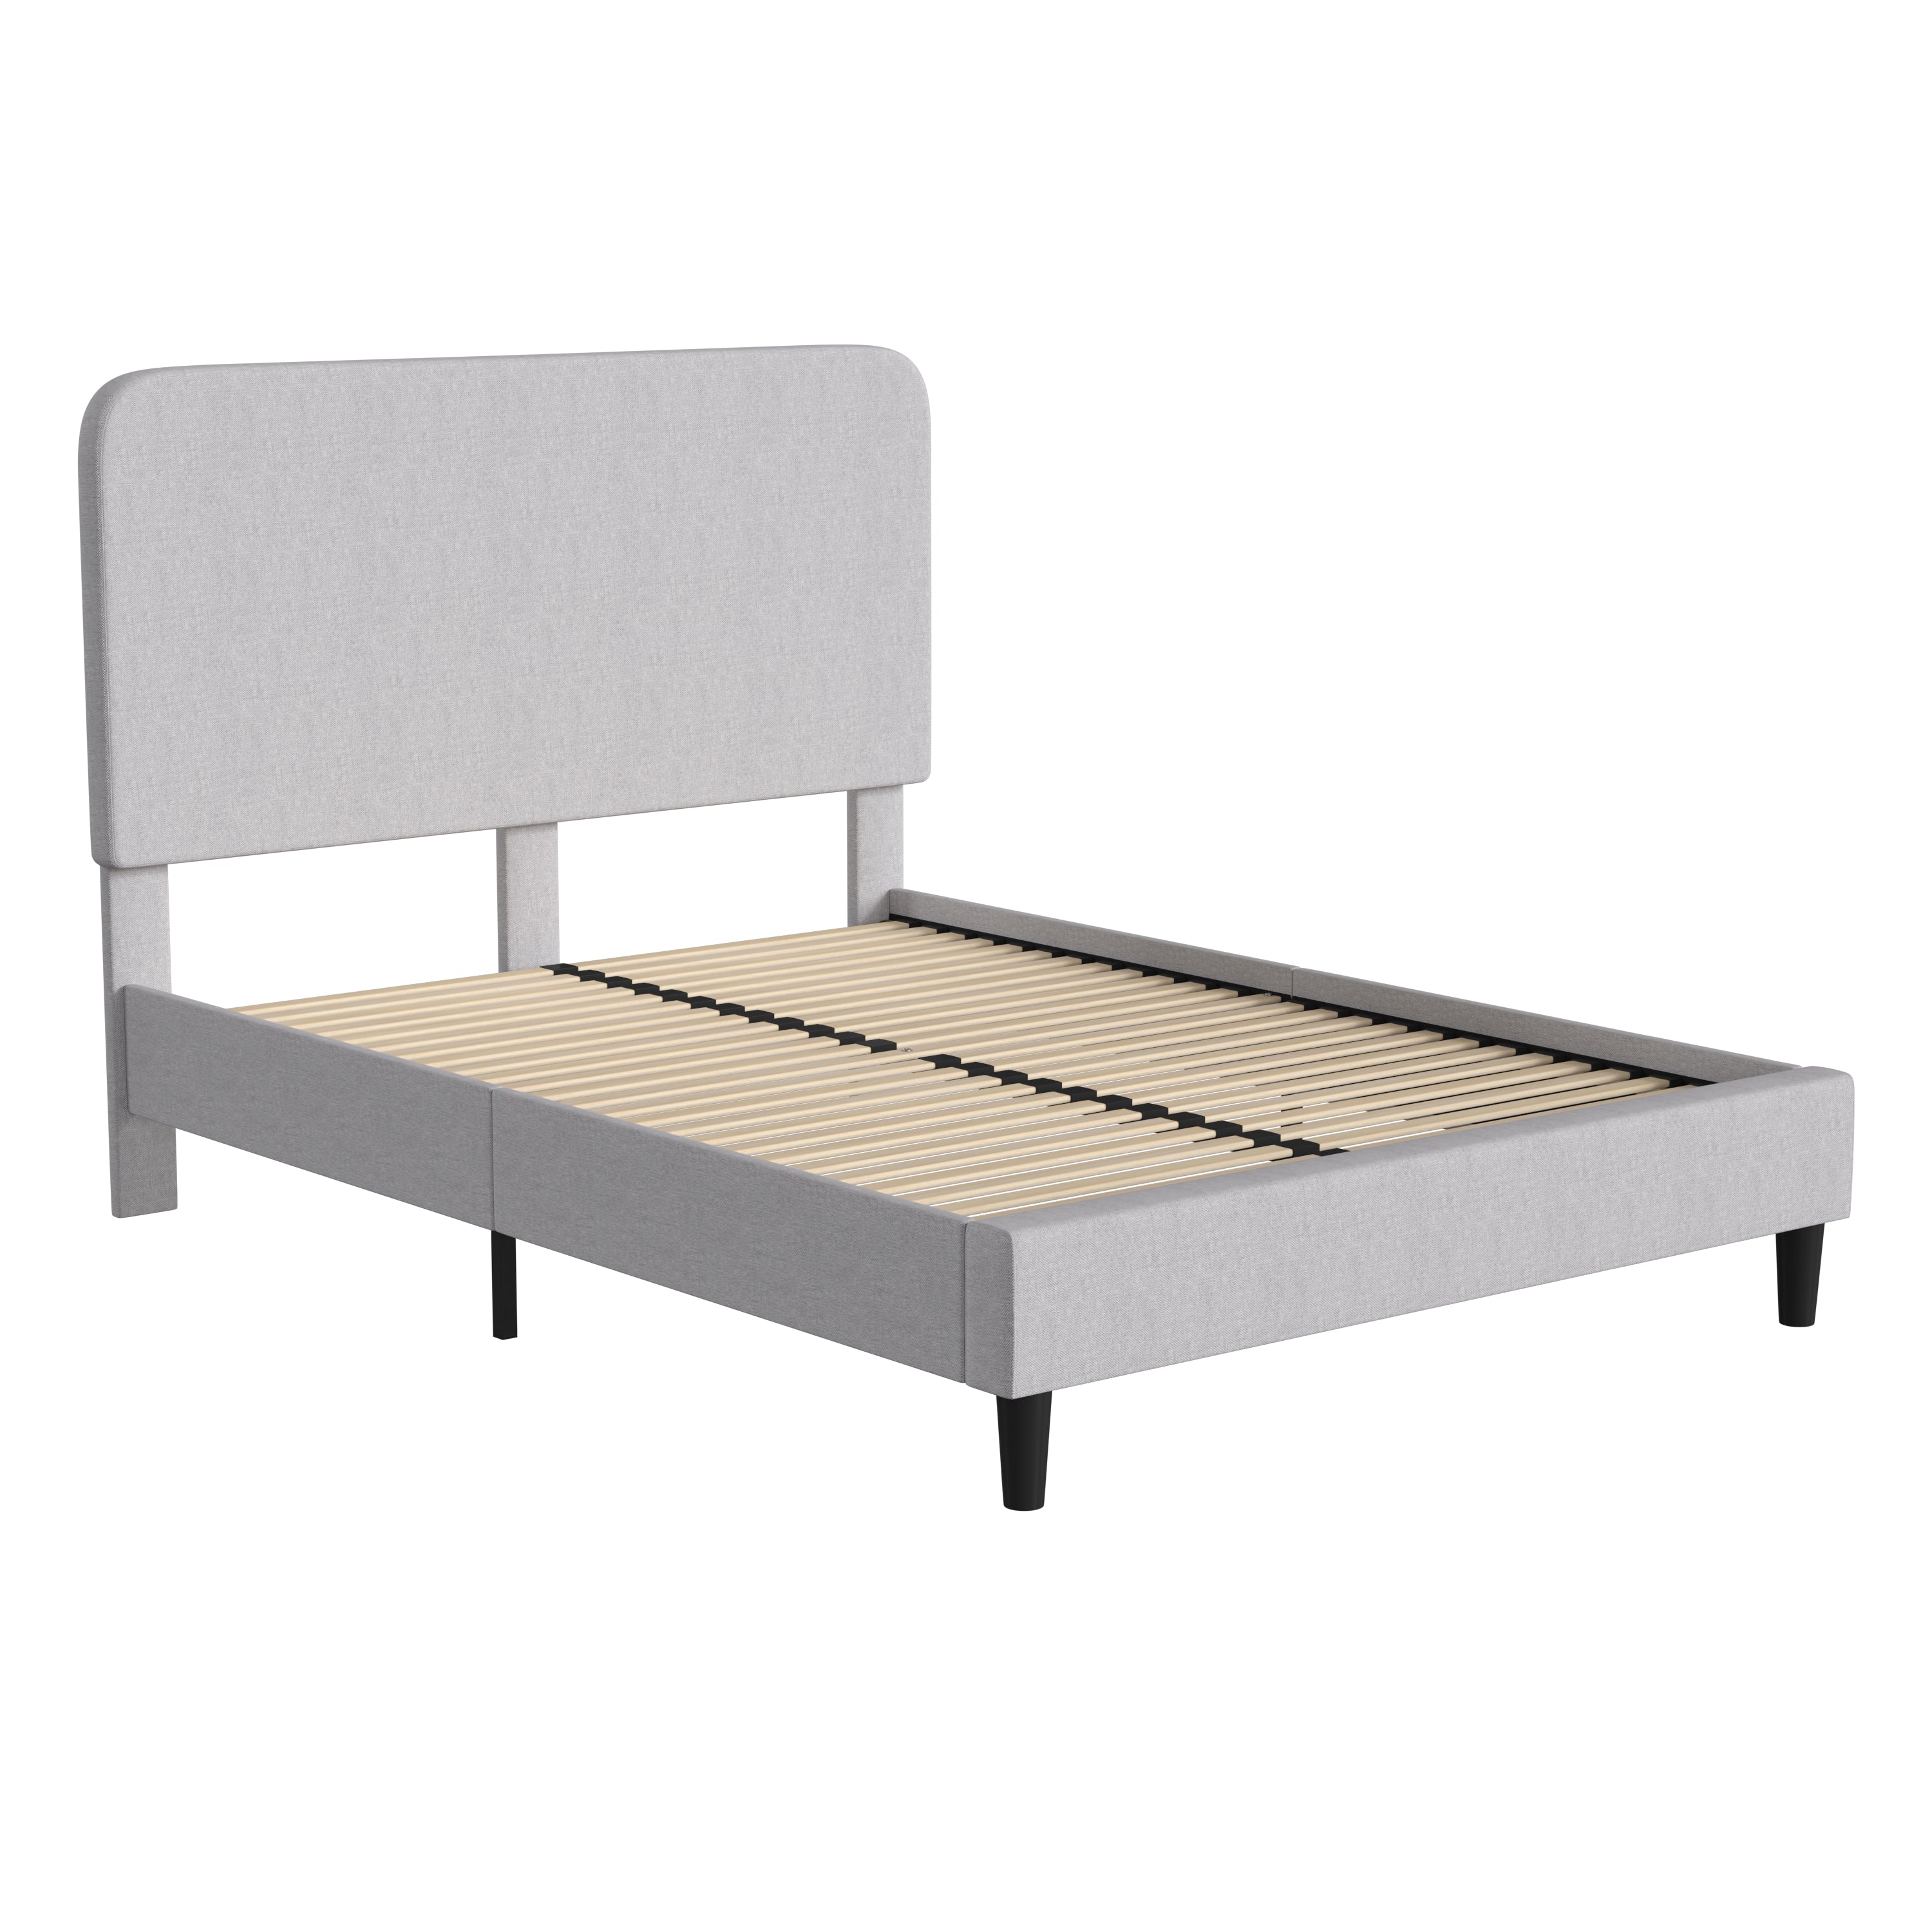 Addison Upholstered Platform Bed - Headboard with Rounded Edges - No Box Spring or Foundation Needed-Bed-Flash Furniture-Wall2Wall Furnishings